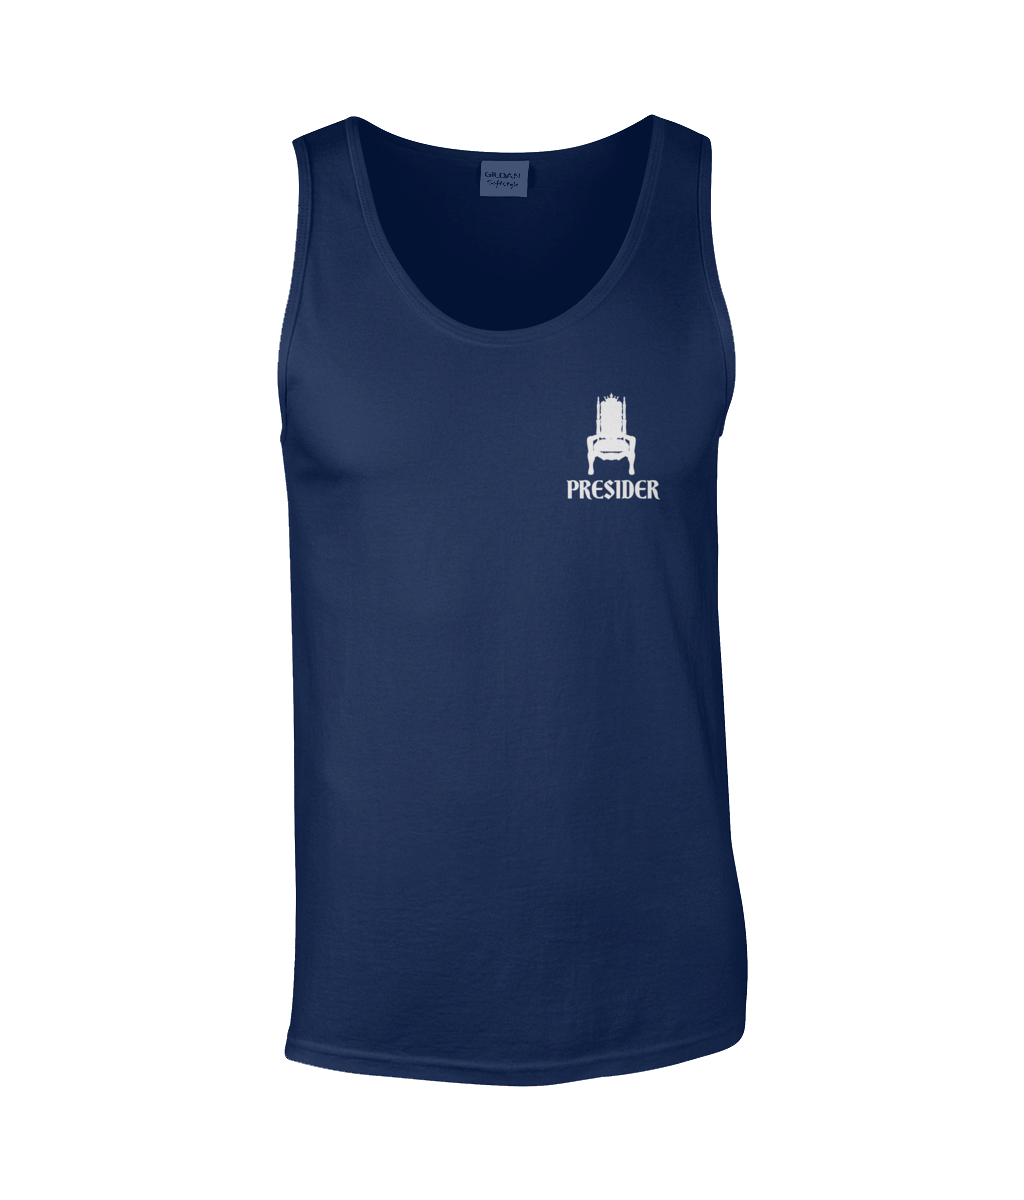 SoftStyle Tank Top (Navy Blue)